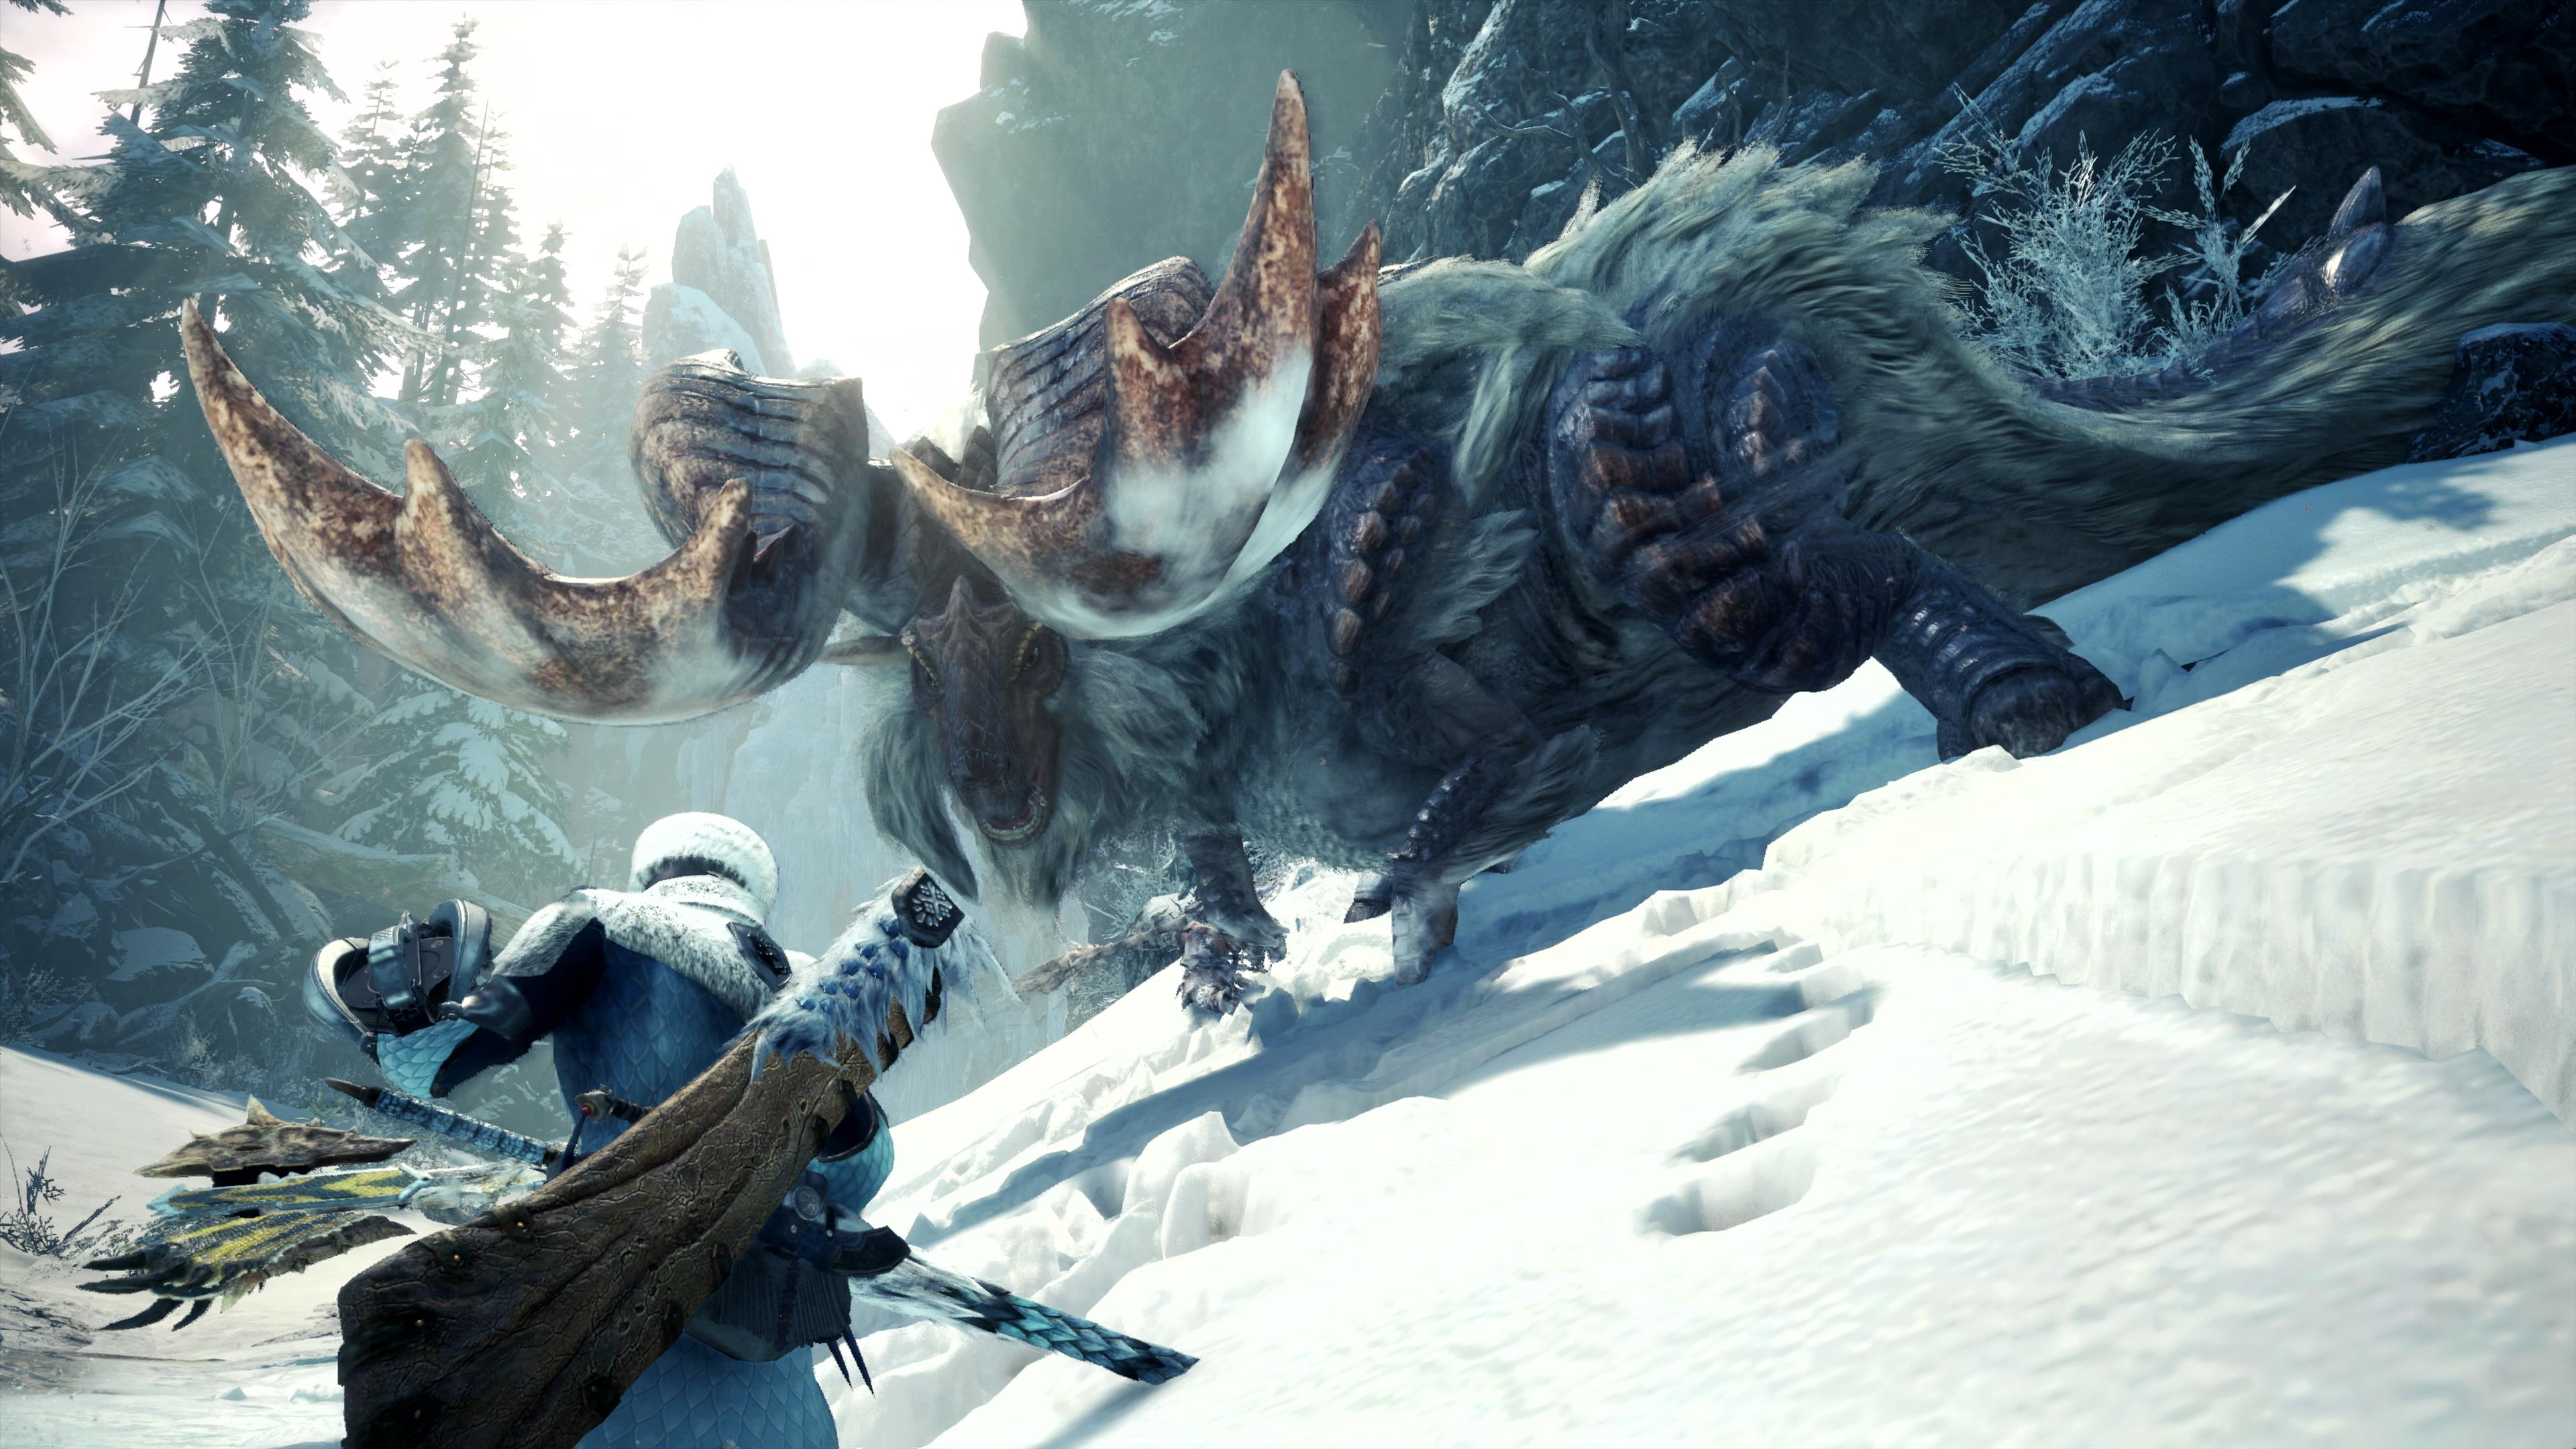 Image for PC release pushes Monster Hunter World: Iceborne past 4 million units shipped